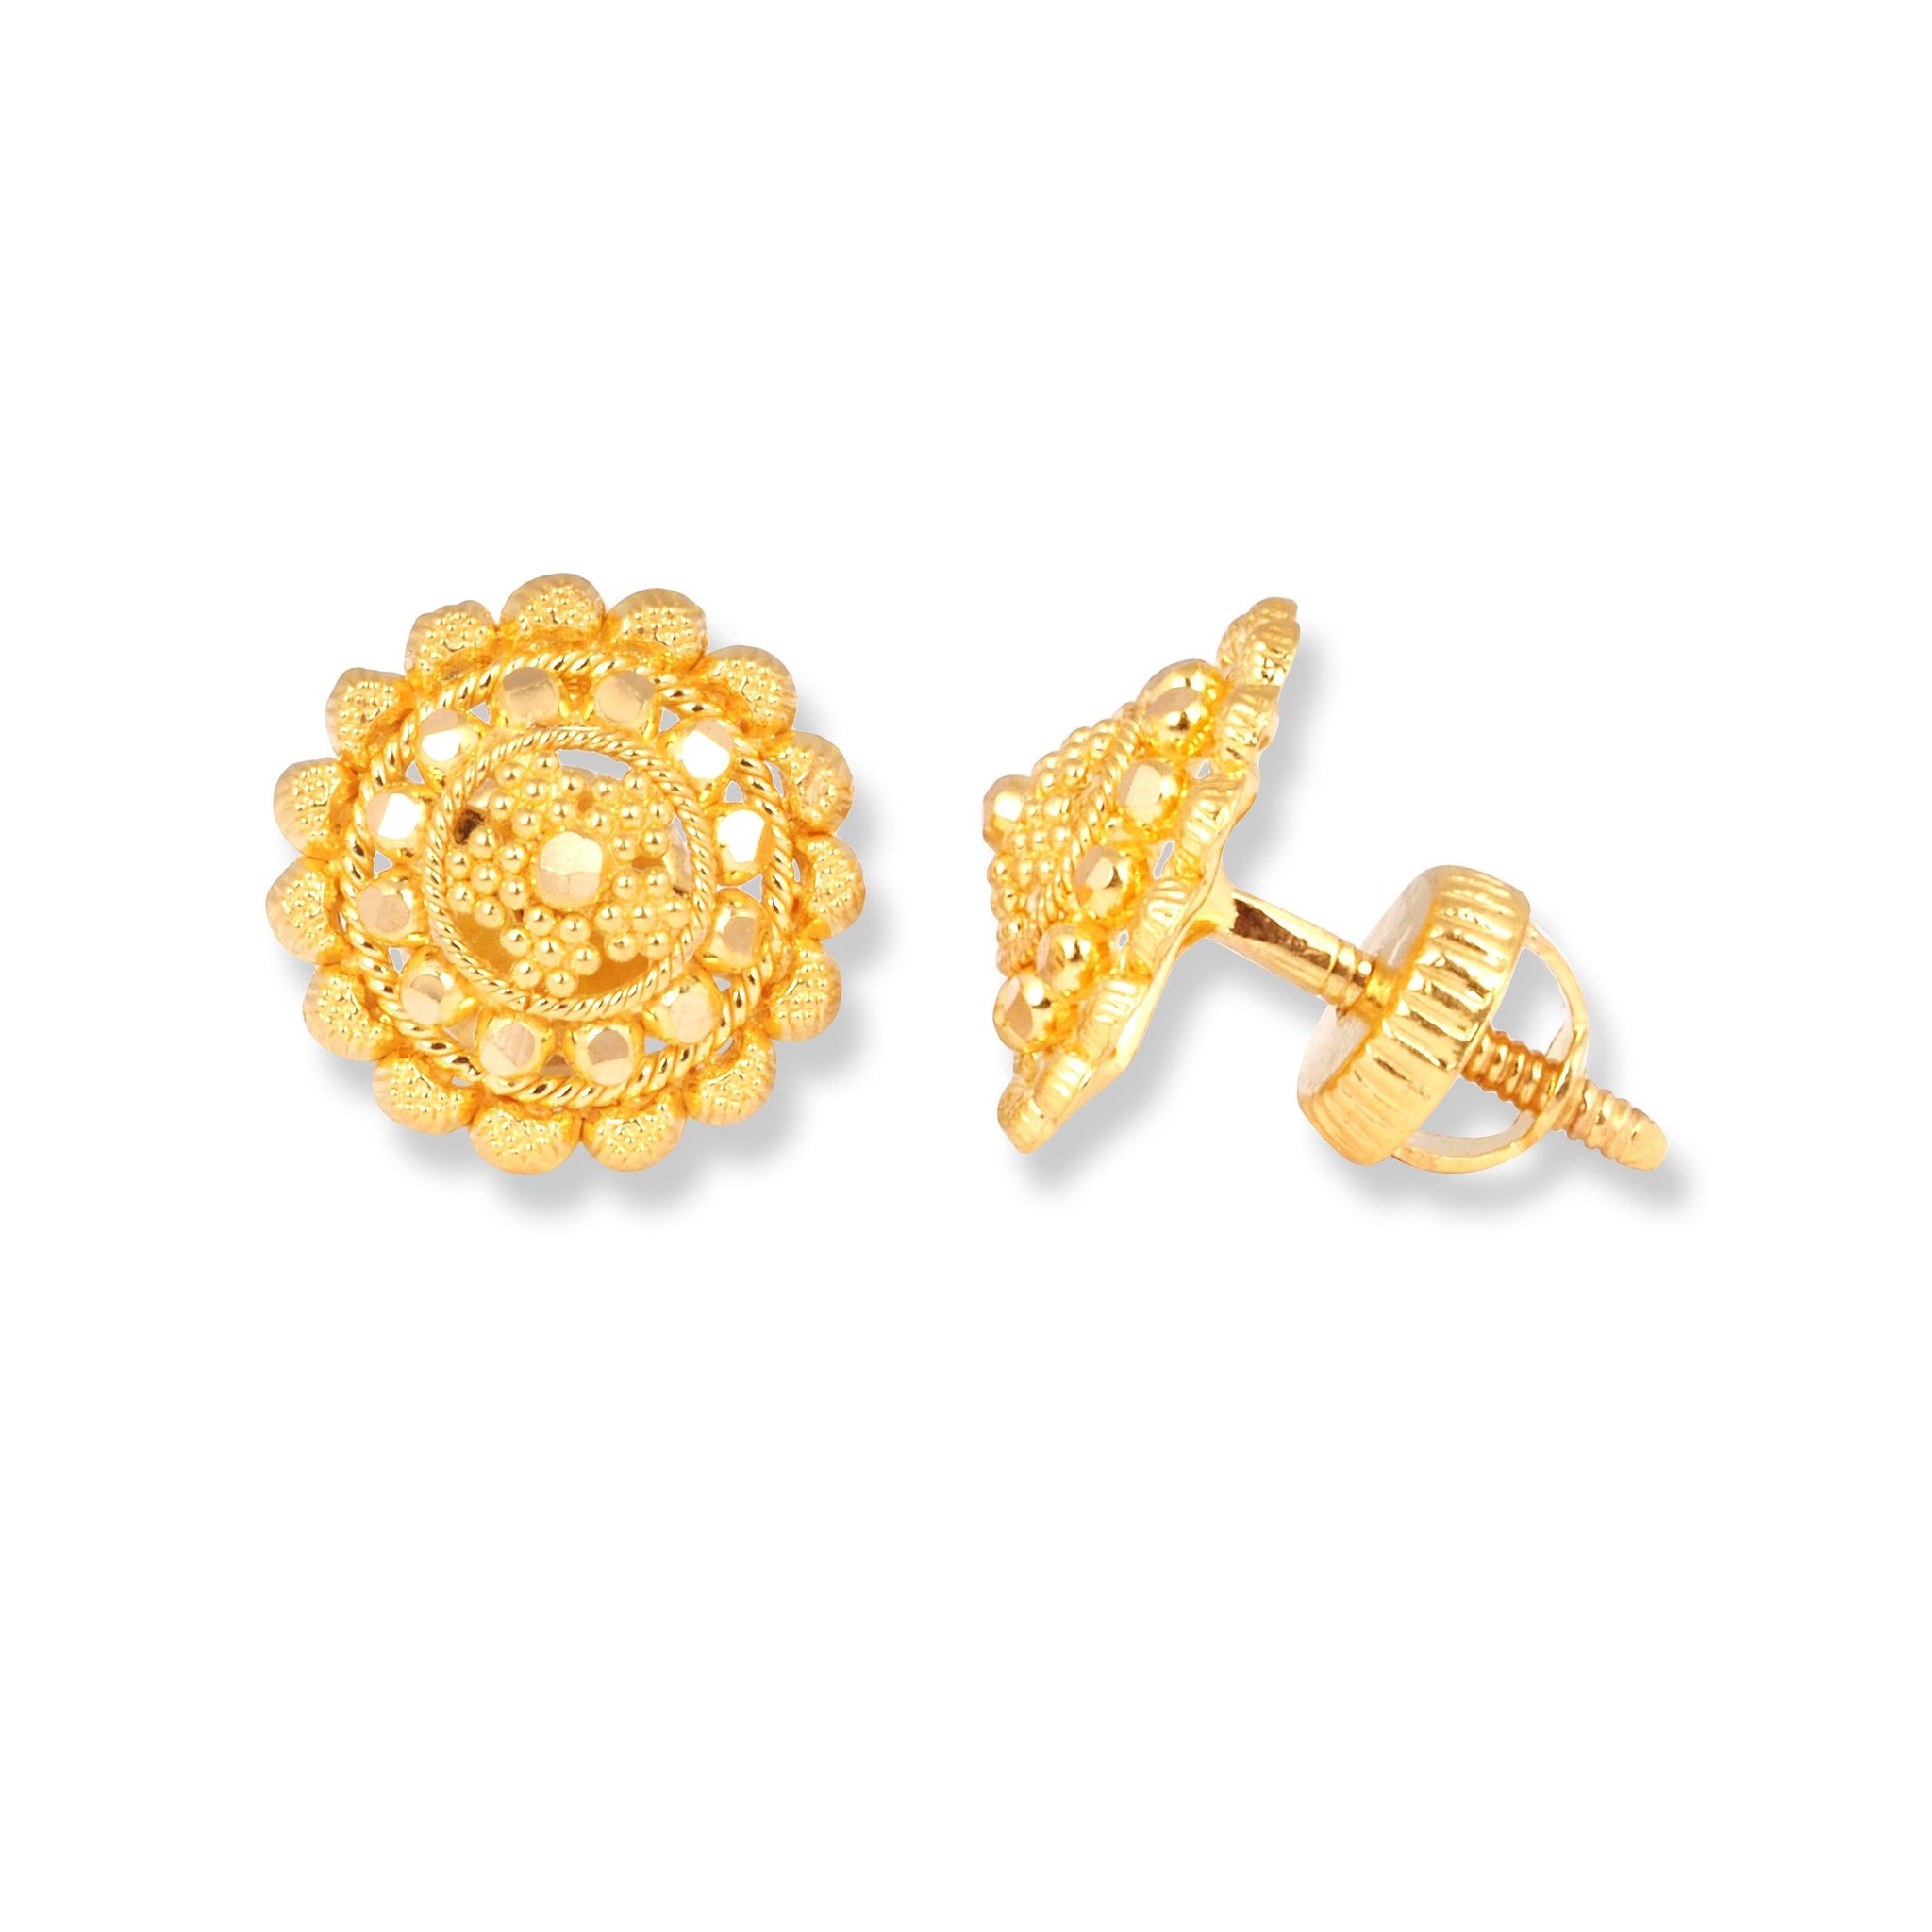 22ct Gold Earrings with Filigree Design (4.1g) E-7884